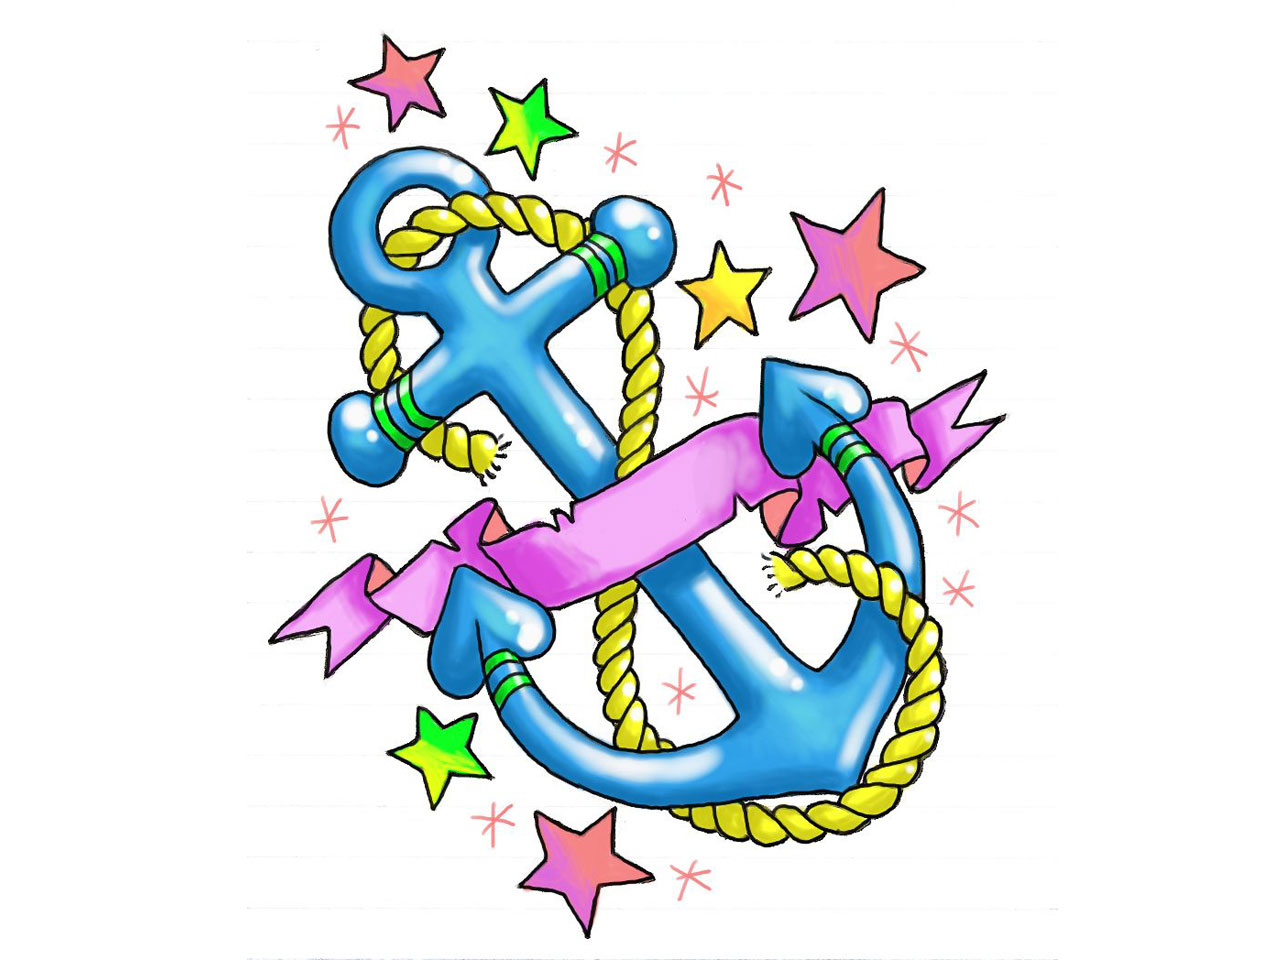 Free designs - Girly anchor with stars and hearts tattoo wallpaper